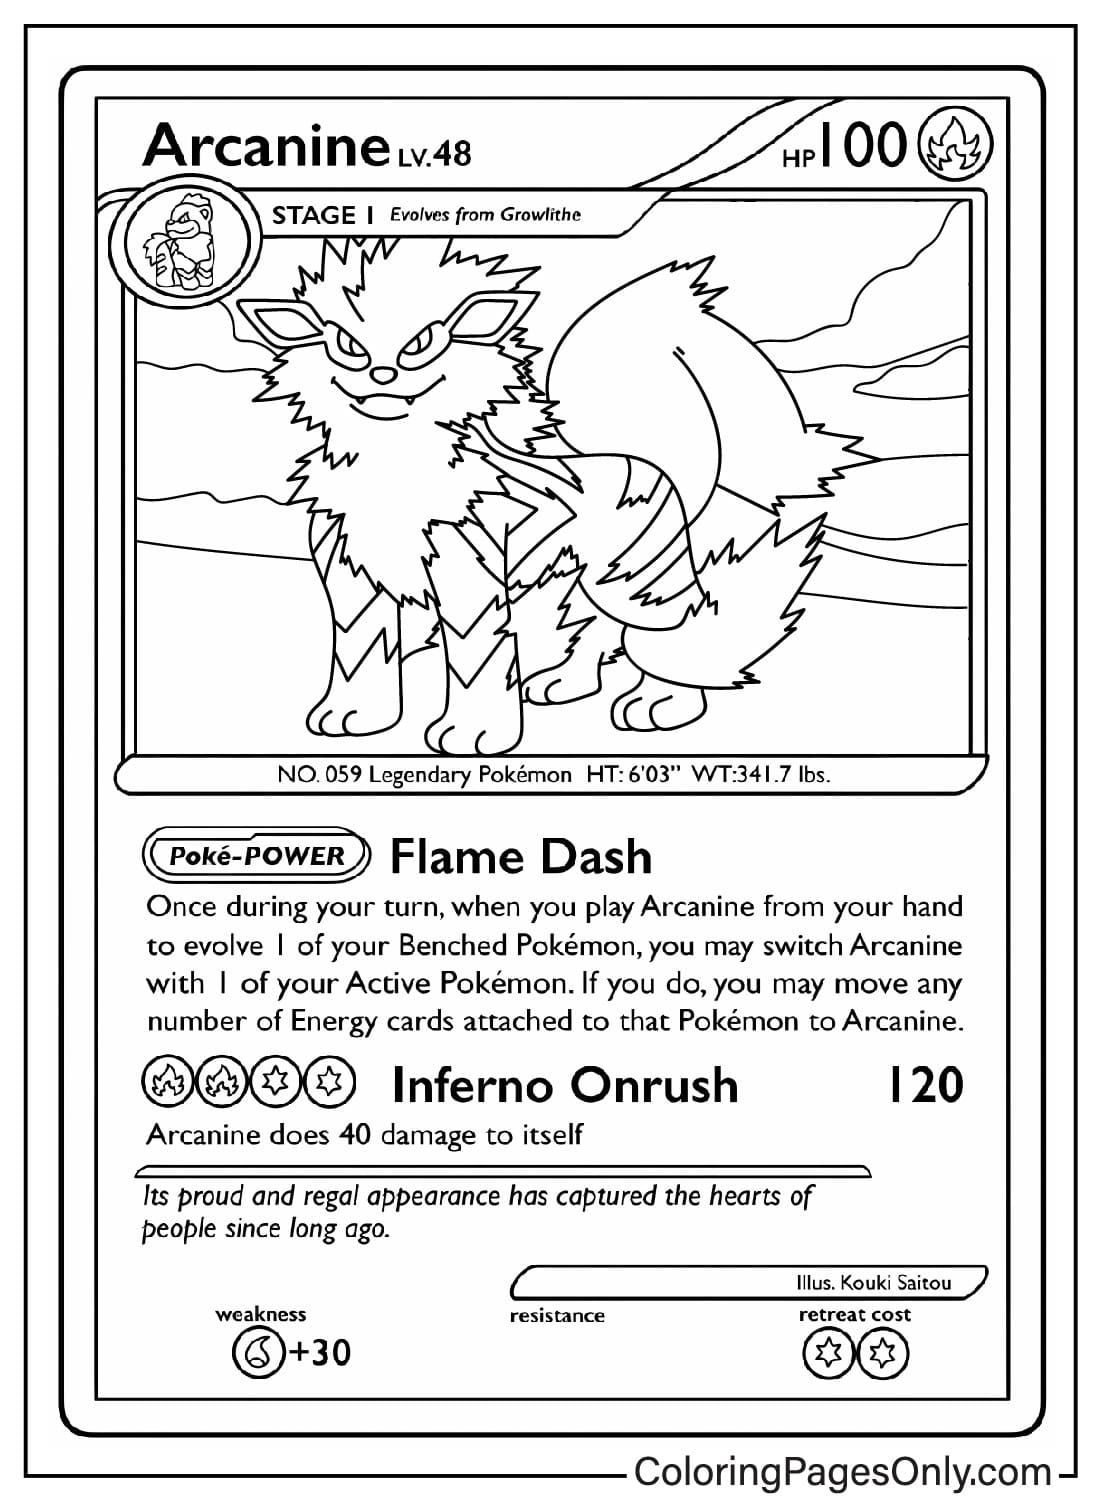 Arcanine Pokemon Card Coloring Page from Pokemon Card